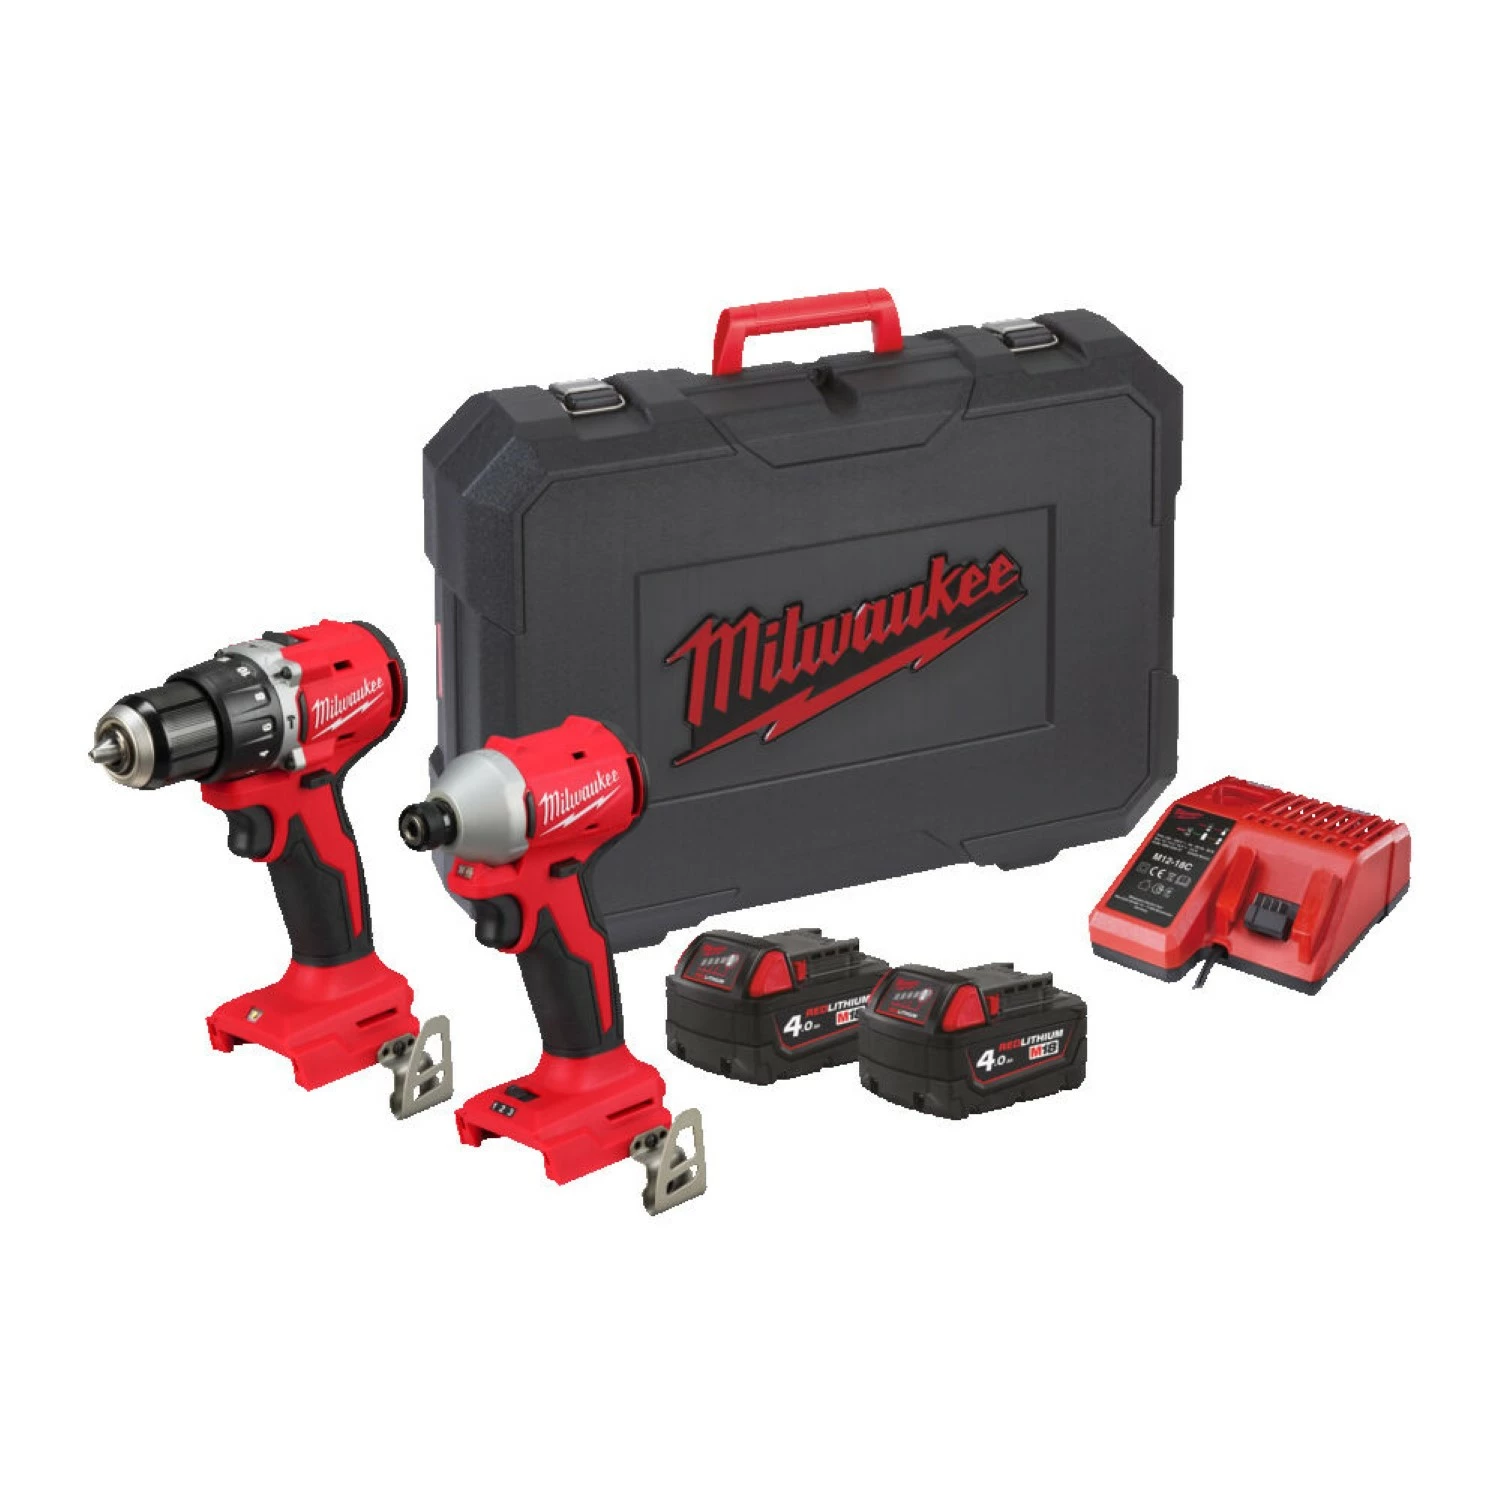 Milwaukee M18 BLCPP2A-402C  Compact Brushless Hammer Drill + Compact Brushless Impact Drill (2x 4.0Ah accu)